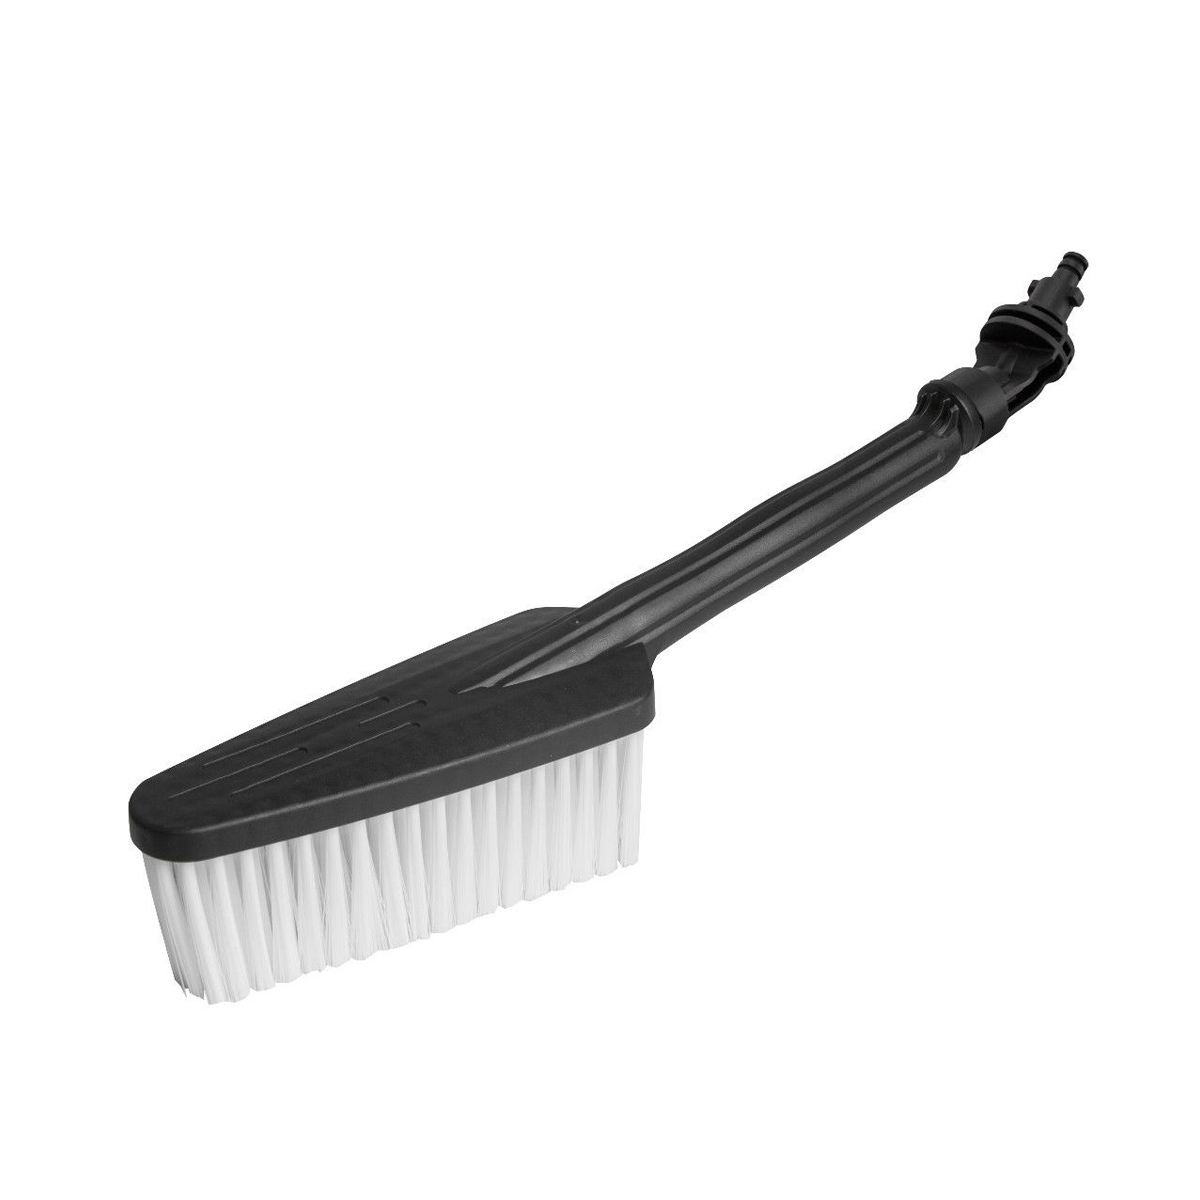 Cleaning-Brush-Accessory-For-WORX-WA4048-Hydroshot-Power-Cleaner-Tool-Replacement-Accessories-1585970-1